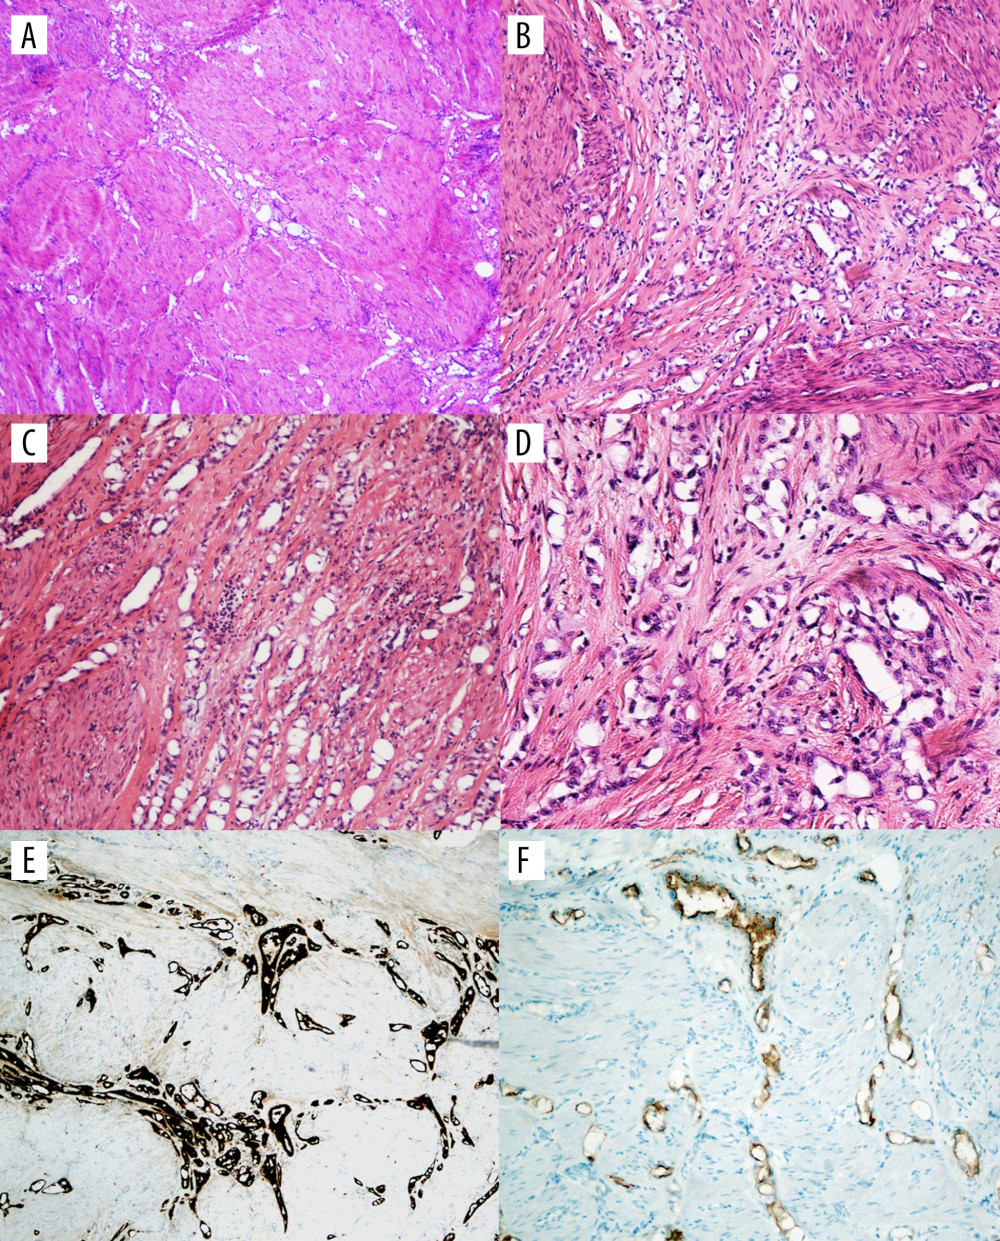 Histopathology examination by hematoxylin and eosin (H&E) staining and immunohistochemistry studies. (A–C) Examination revealed prominent smooth muscle with a gland-like area infiltrated between (H&E 4×, 10×). (D) High-power examination of the gland-like areas reveals a gland lined by a flattened cuboidal lining with small and uniform nuclei and scanty and eosinophilic cytoplasm (H&E; 40×). (E) D2-40 reveals diffuse staining in a gland-like structure (40×). (F) Calretinin reveals diffuse staining in a gland-like structure (40×).